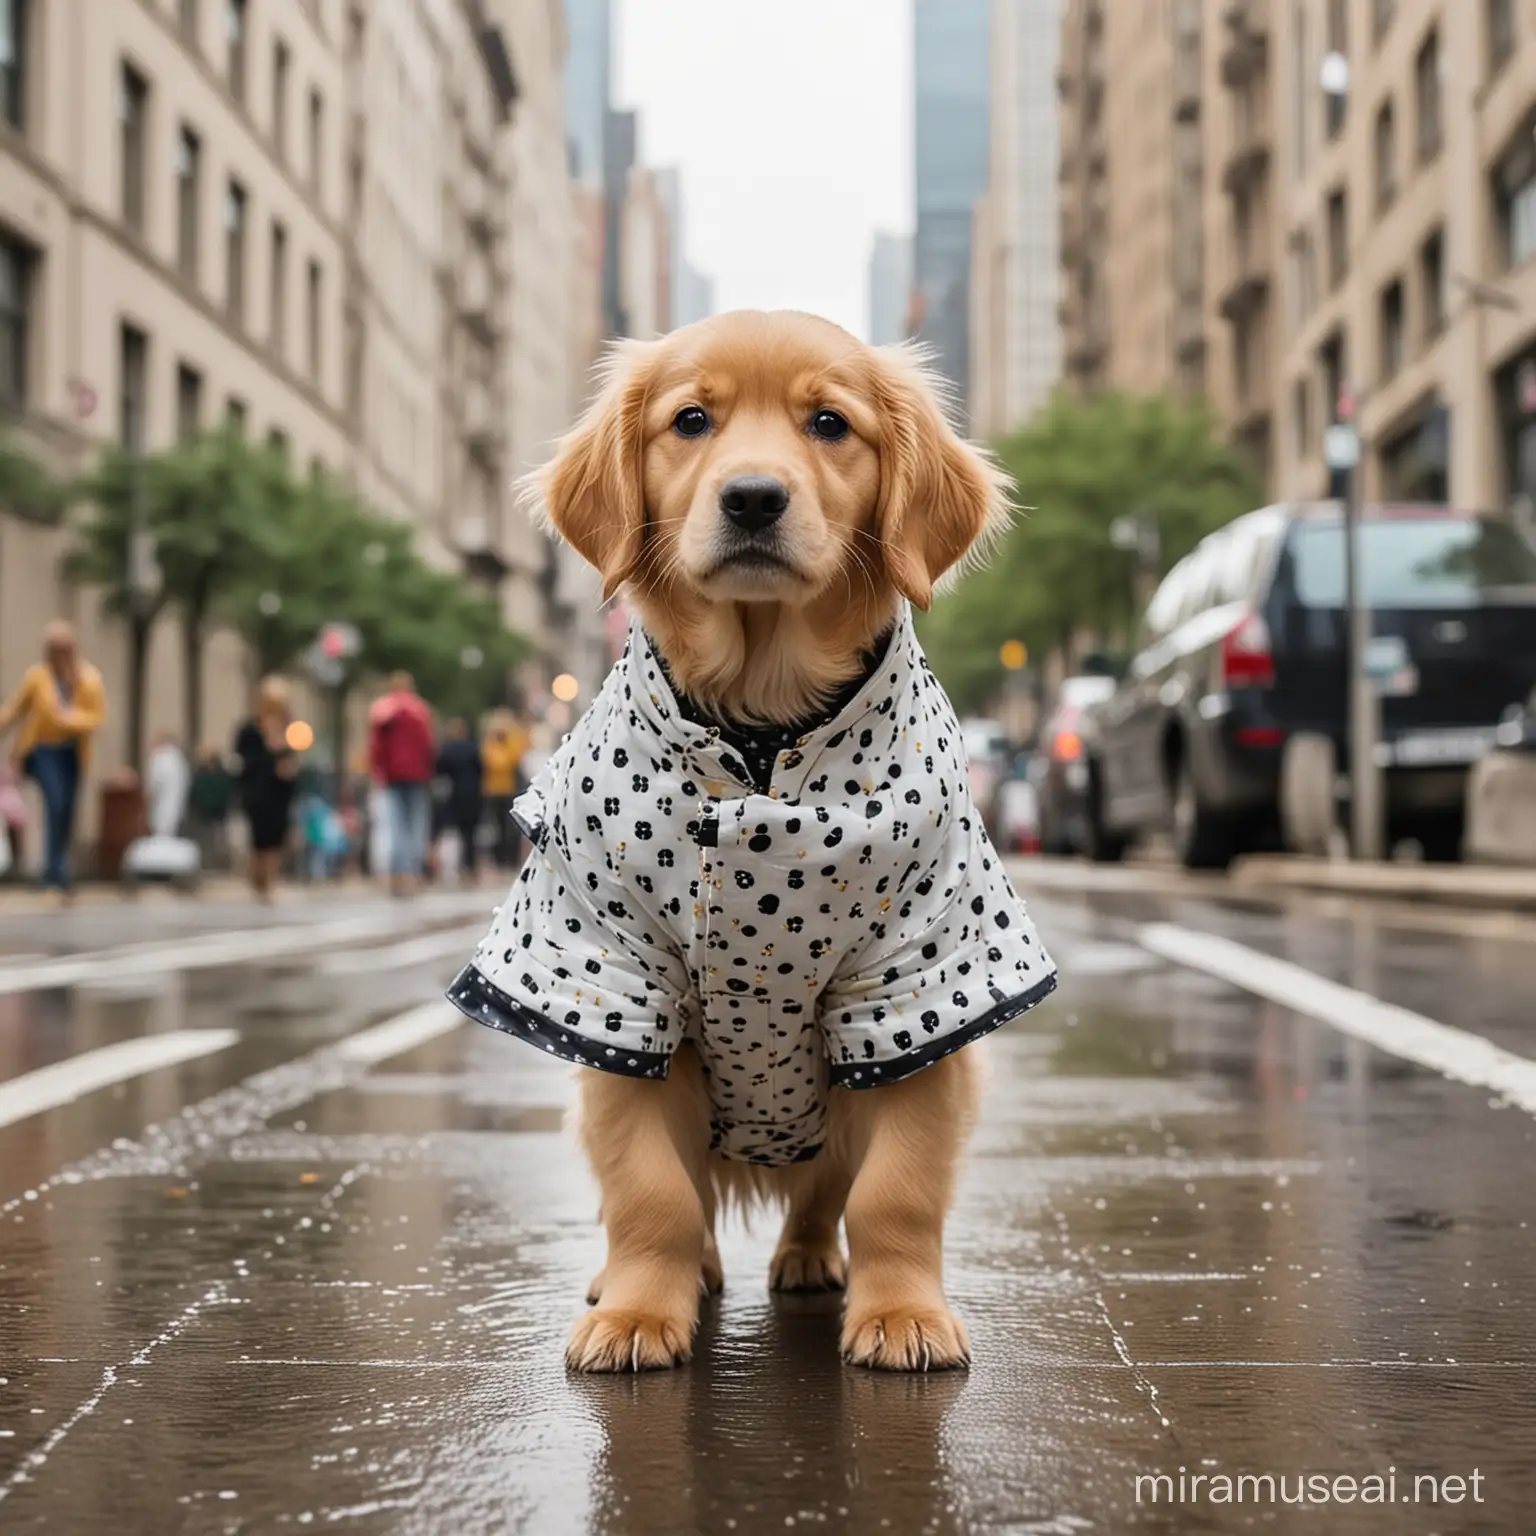 A tiny, fluffy puppy dressed in a fashionable polka-dot raincoat, walking down a bustling city street, with tall buildings in the background.

Dog at the Park: A golden retriever wearing a bandana around its neck, pla